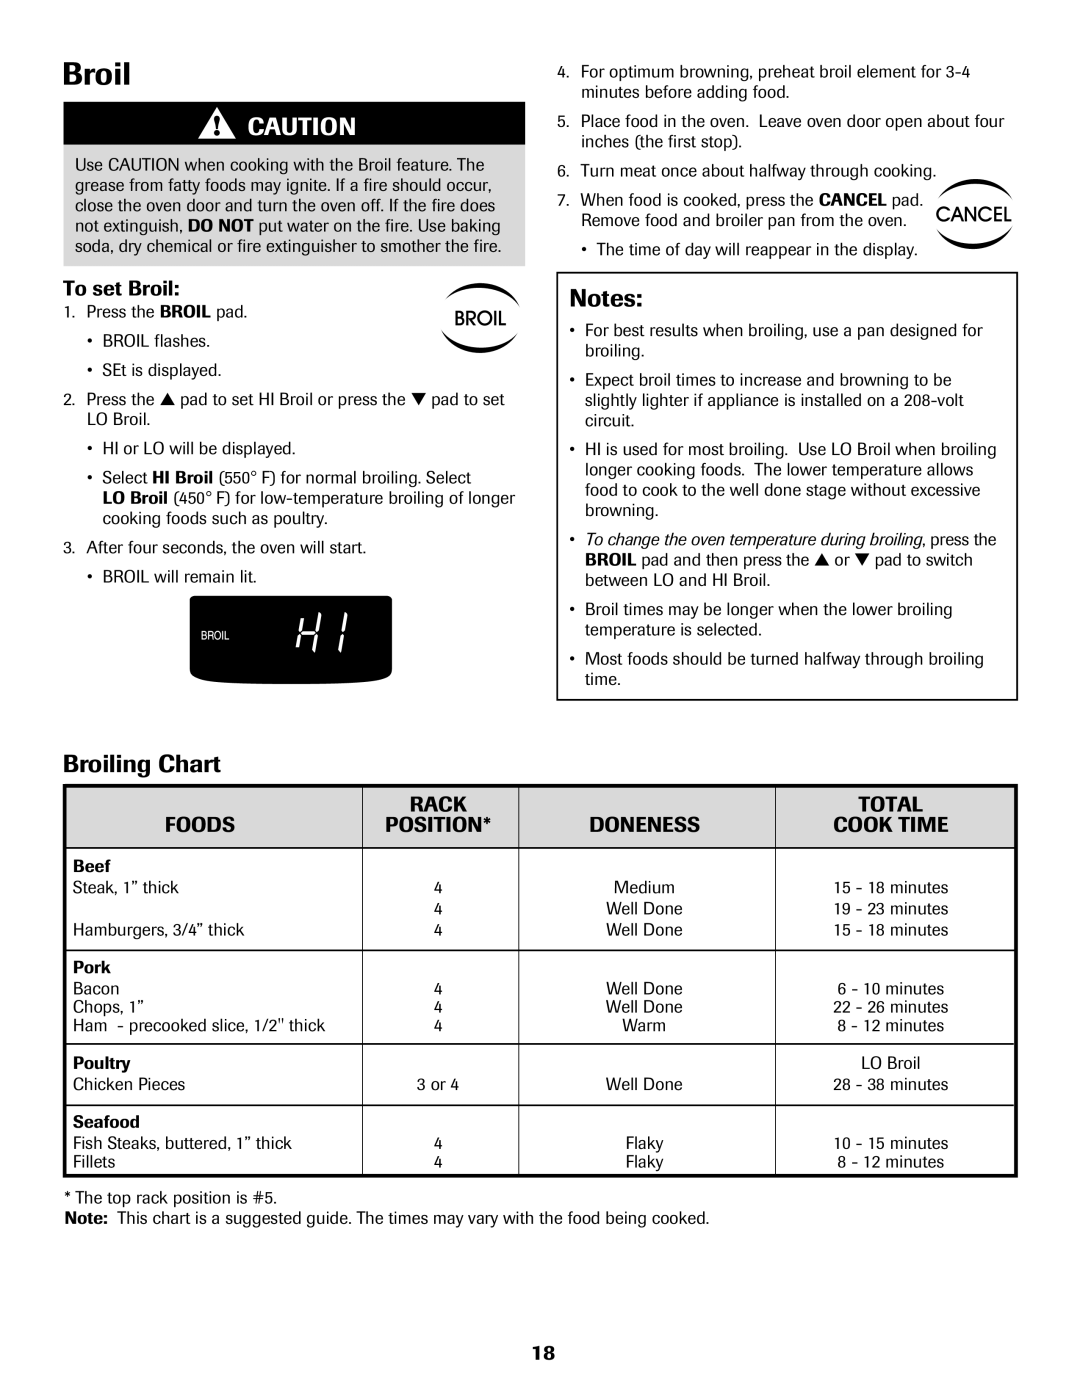 Maytag 500 important safety instructions Broiling Chart, To set Broil, Rack, Total, Foods, Position, Cook Time, Notes 